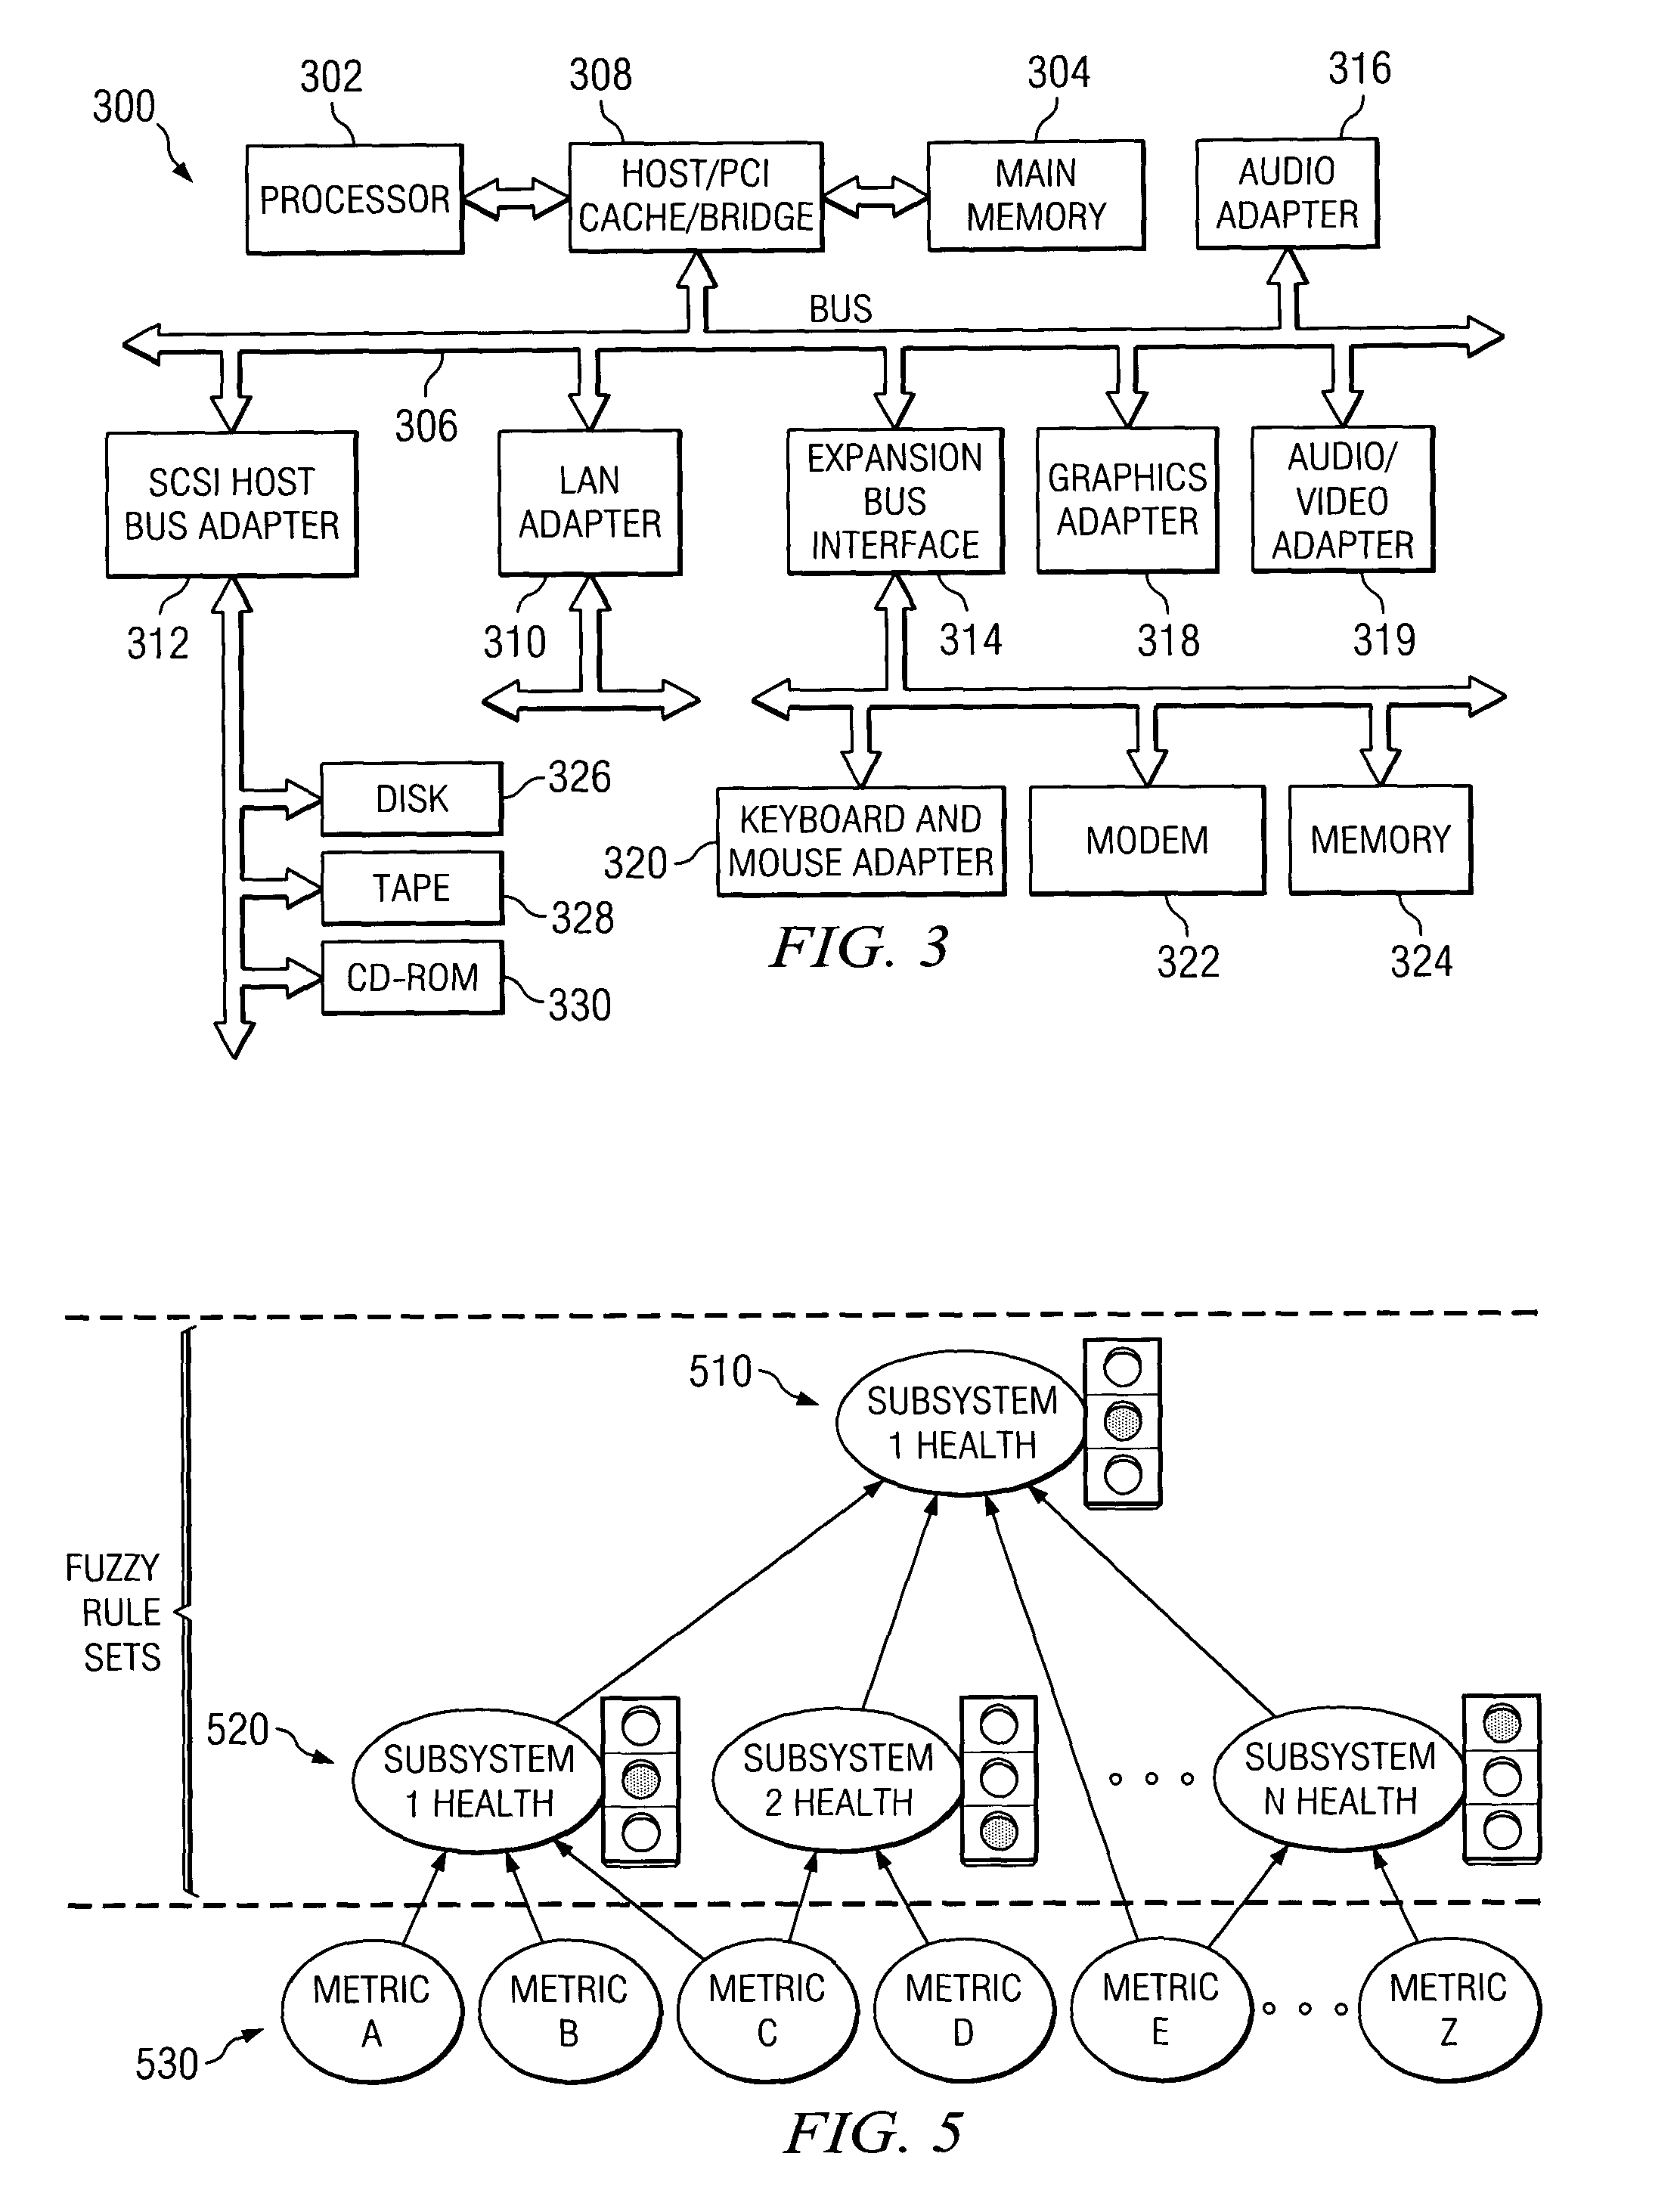 Apparatus and method for monitoring system health based on fuzzy metric data ranges and fuzzy rules